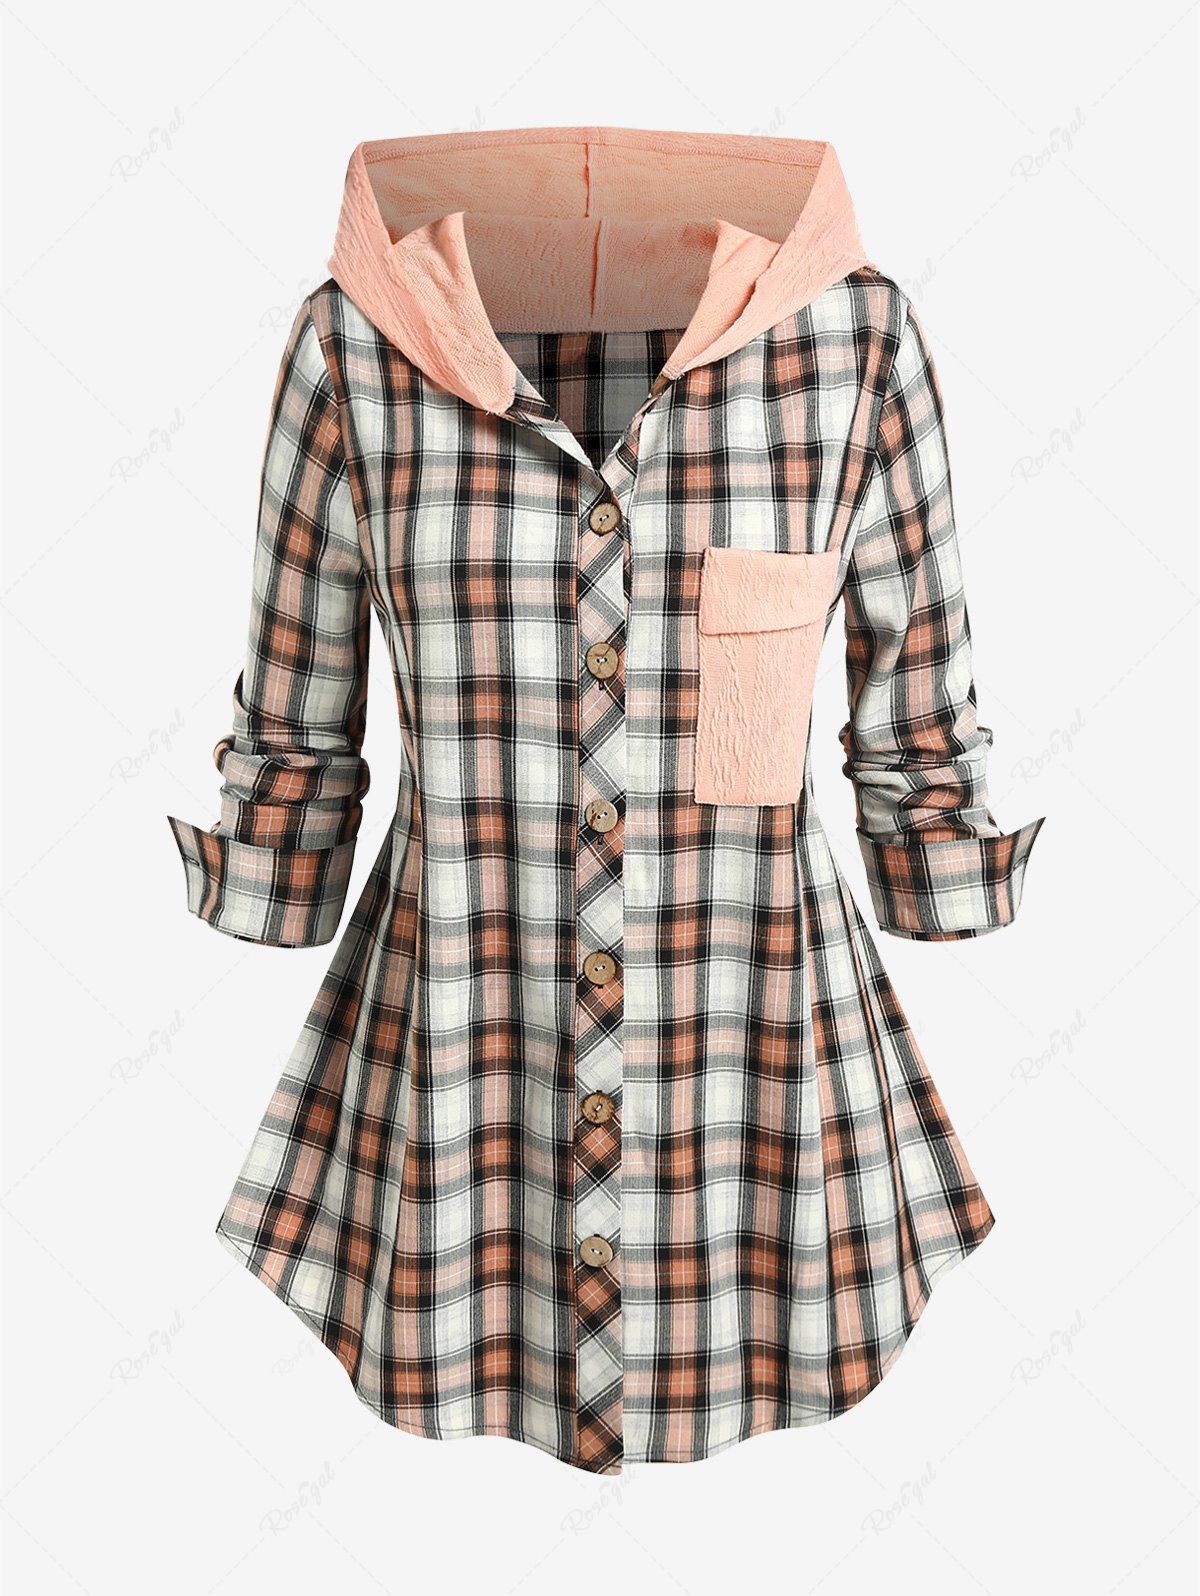 Shop Plus Size Plaid Colorblock Textured Hooded Shirt with Pocket  